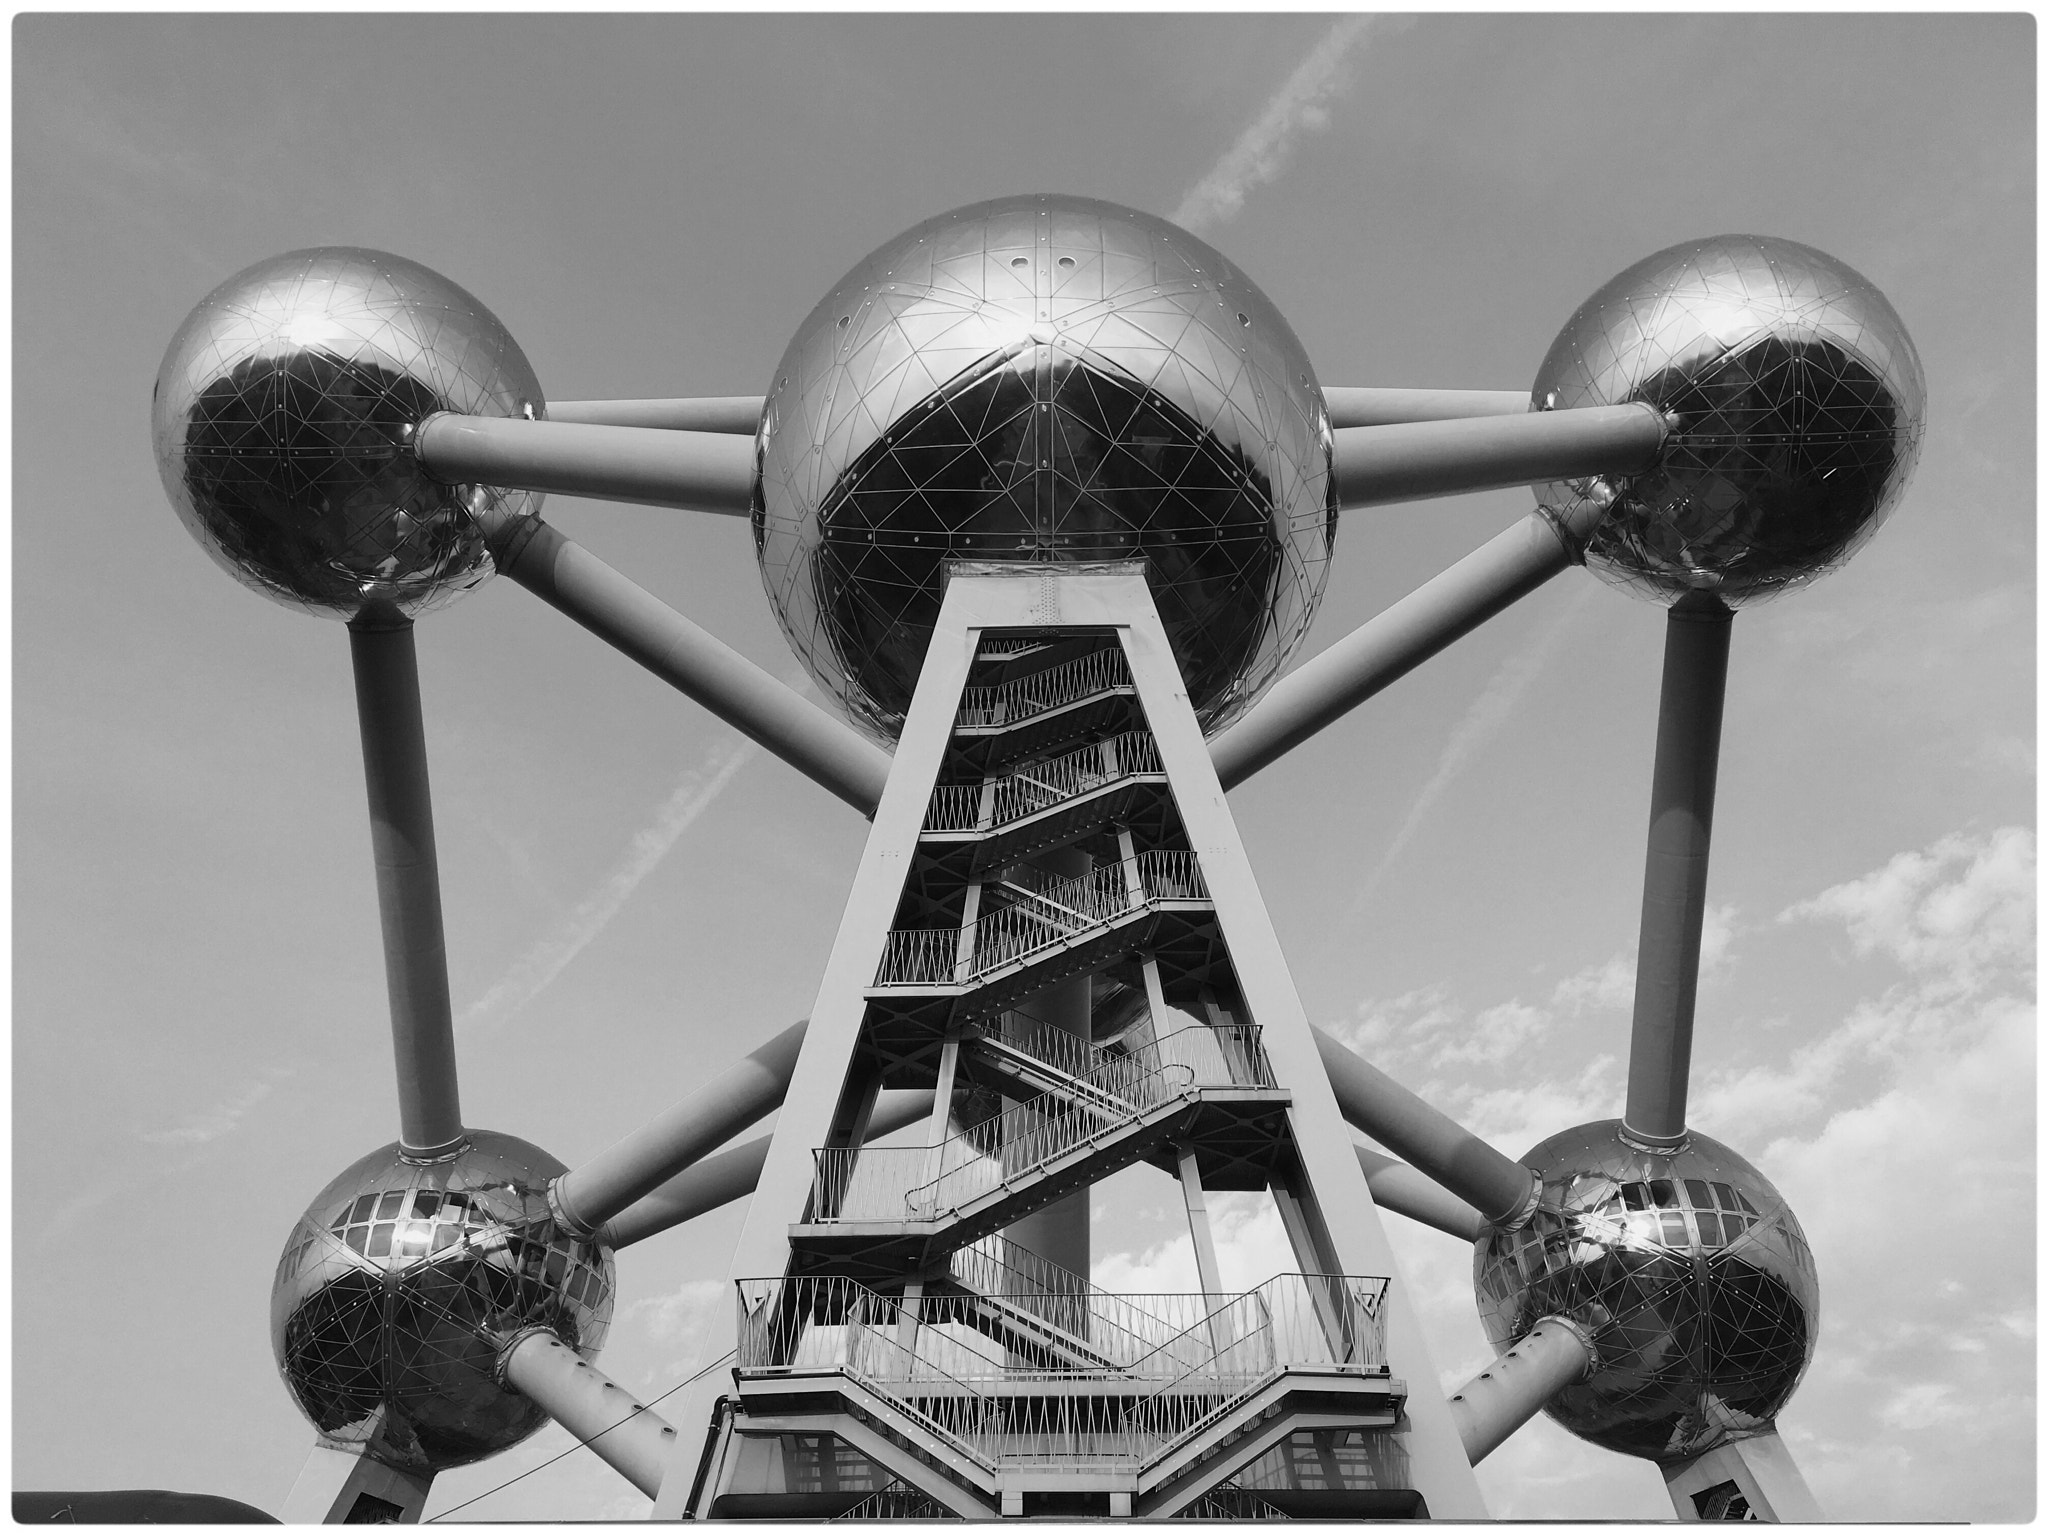 Jag.gr 645 PRO Mk III for iOS sample photo. Atomium in brussels photography